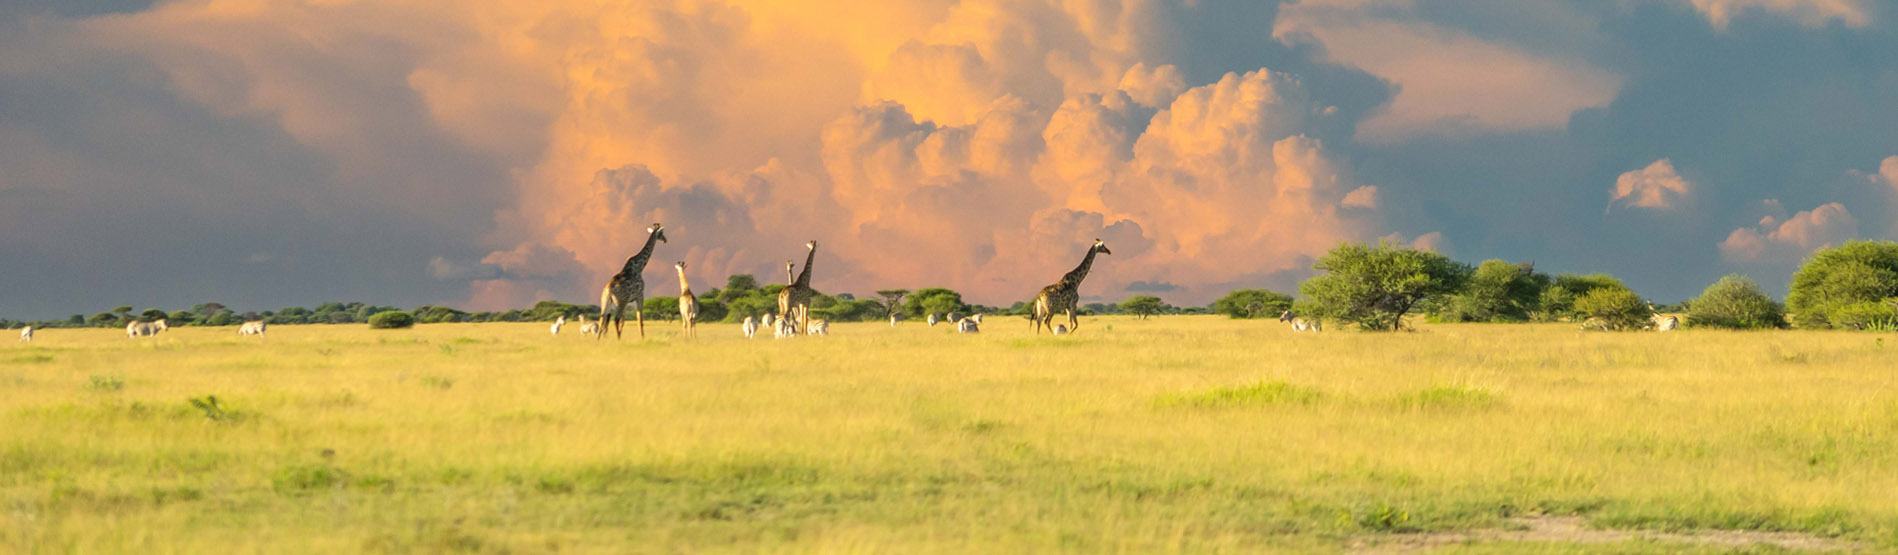 Image of a field with giraffes and green grass